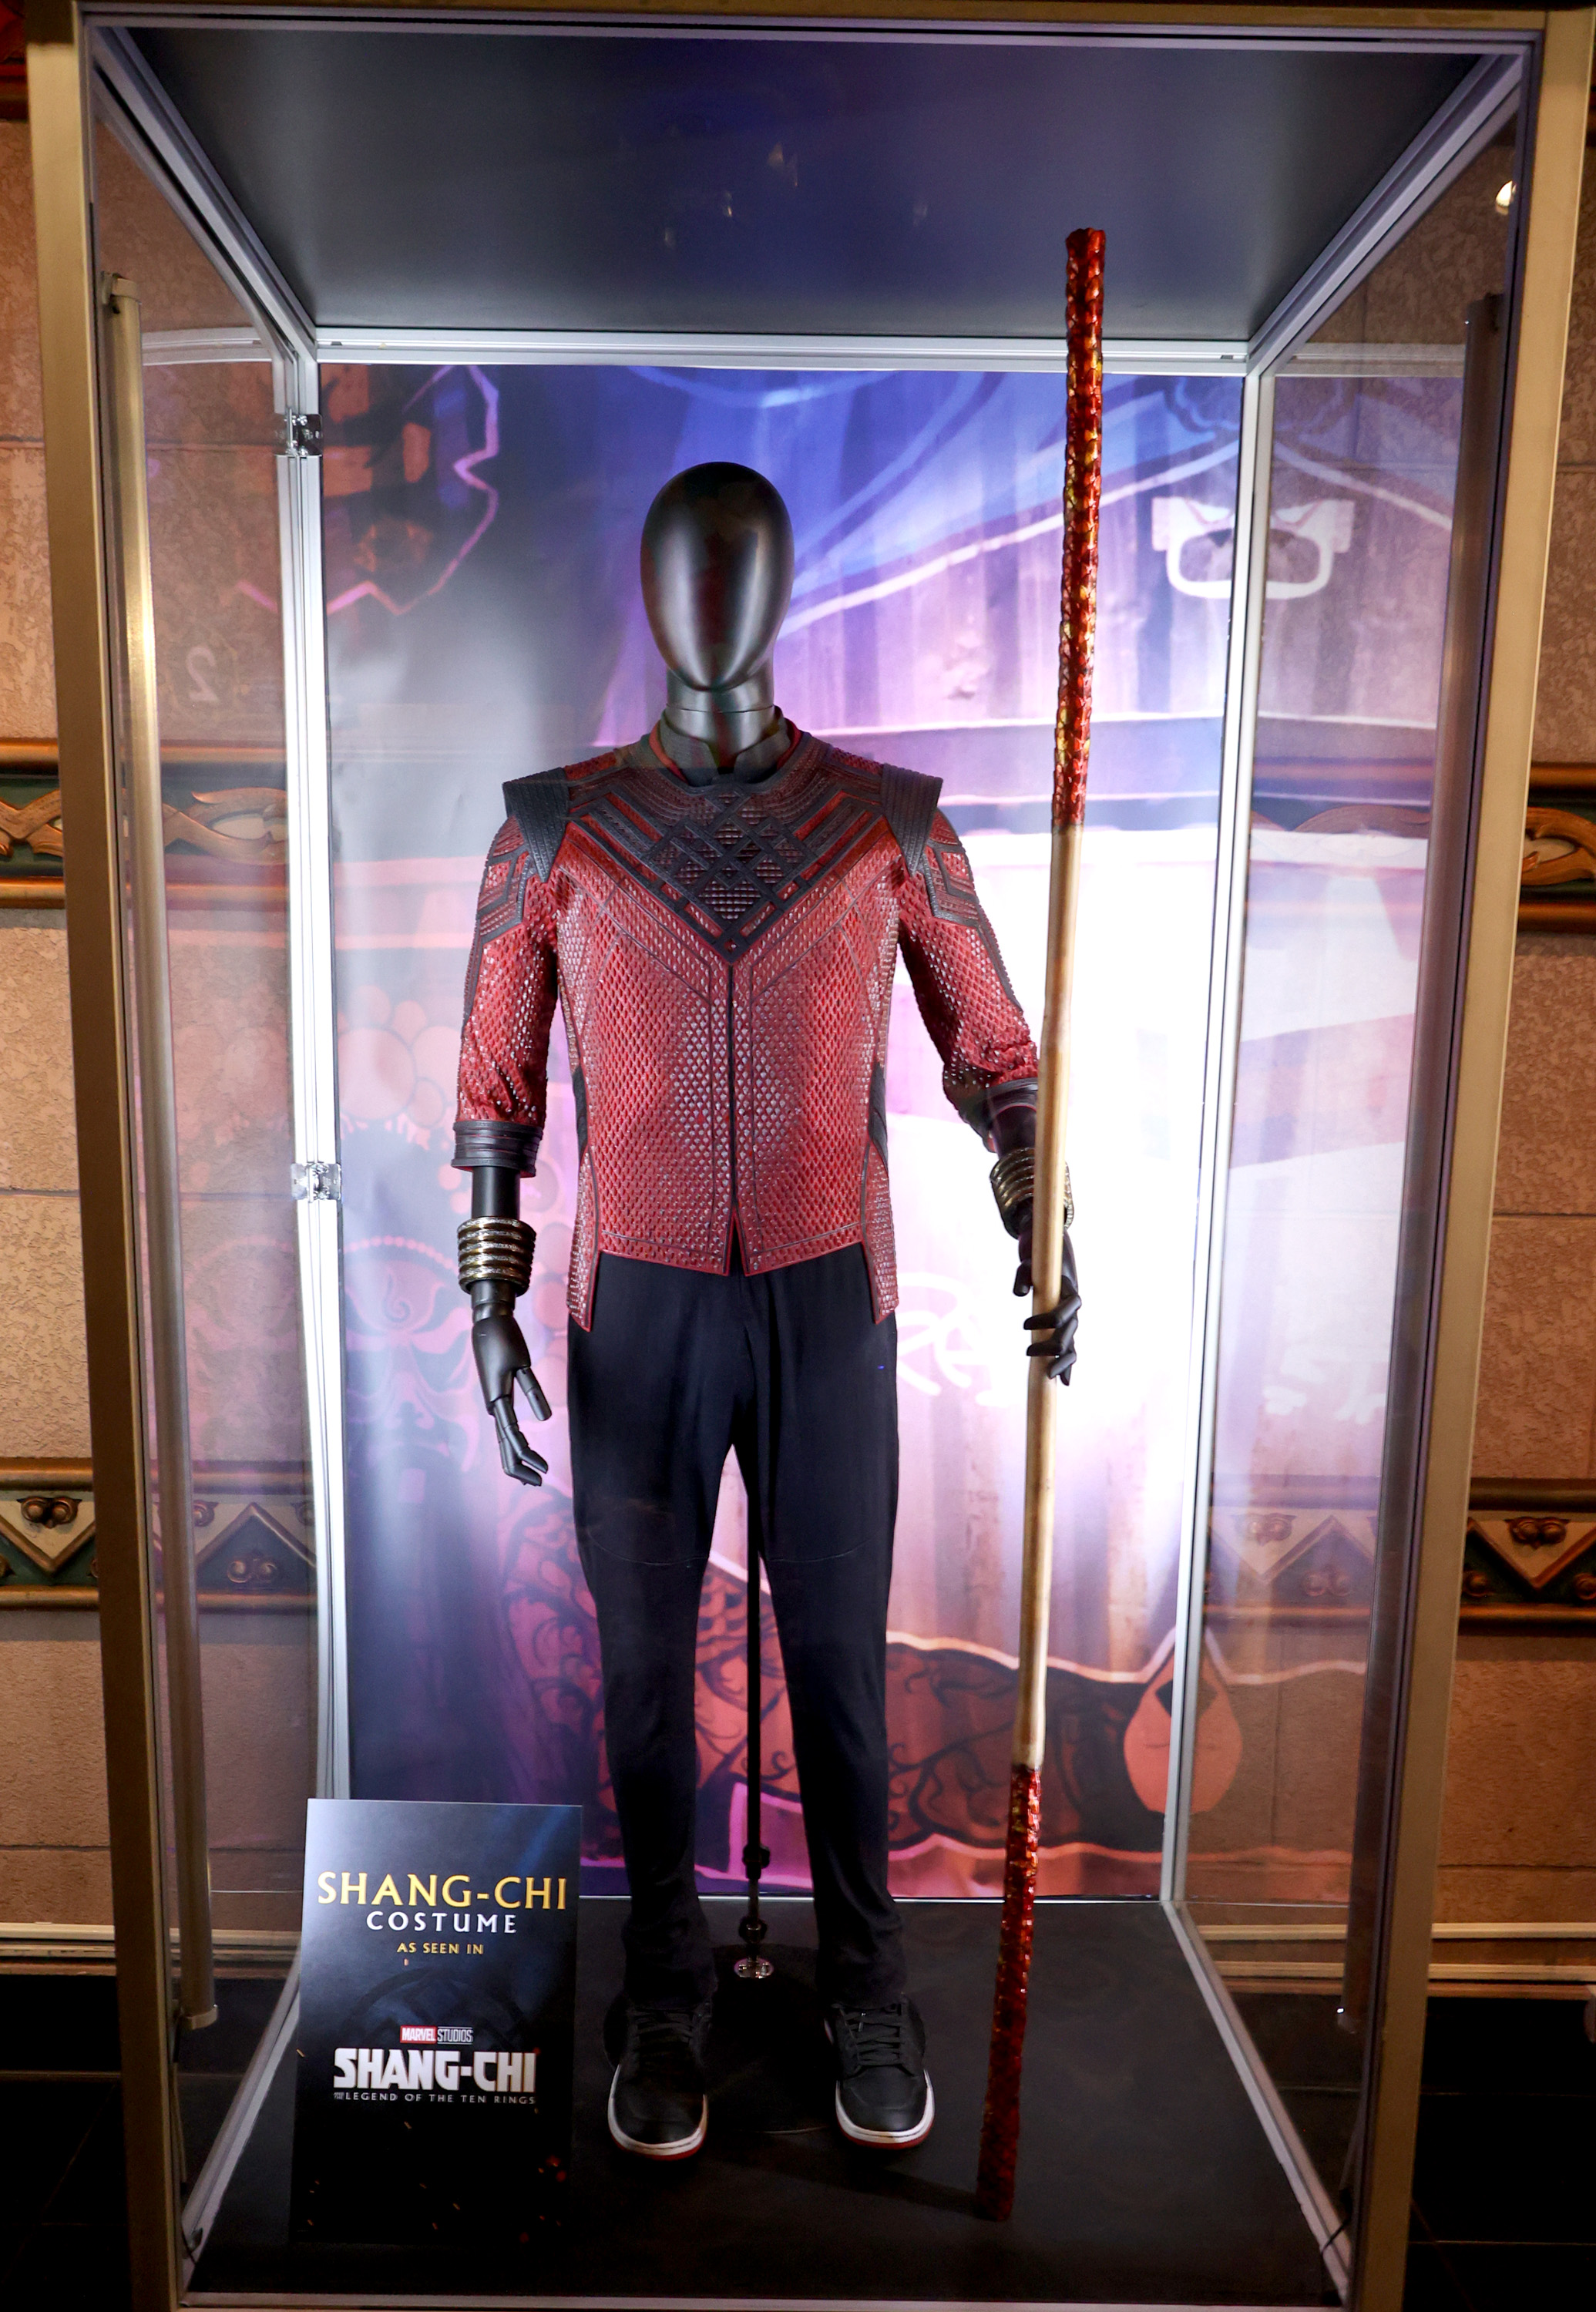 The costume for Shang-Chi from the new hit movie, 'Shang-Chi and the Legend of the Ten Rings'